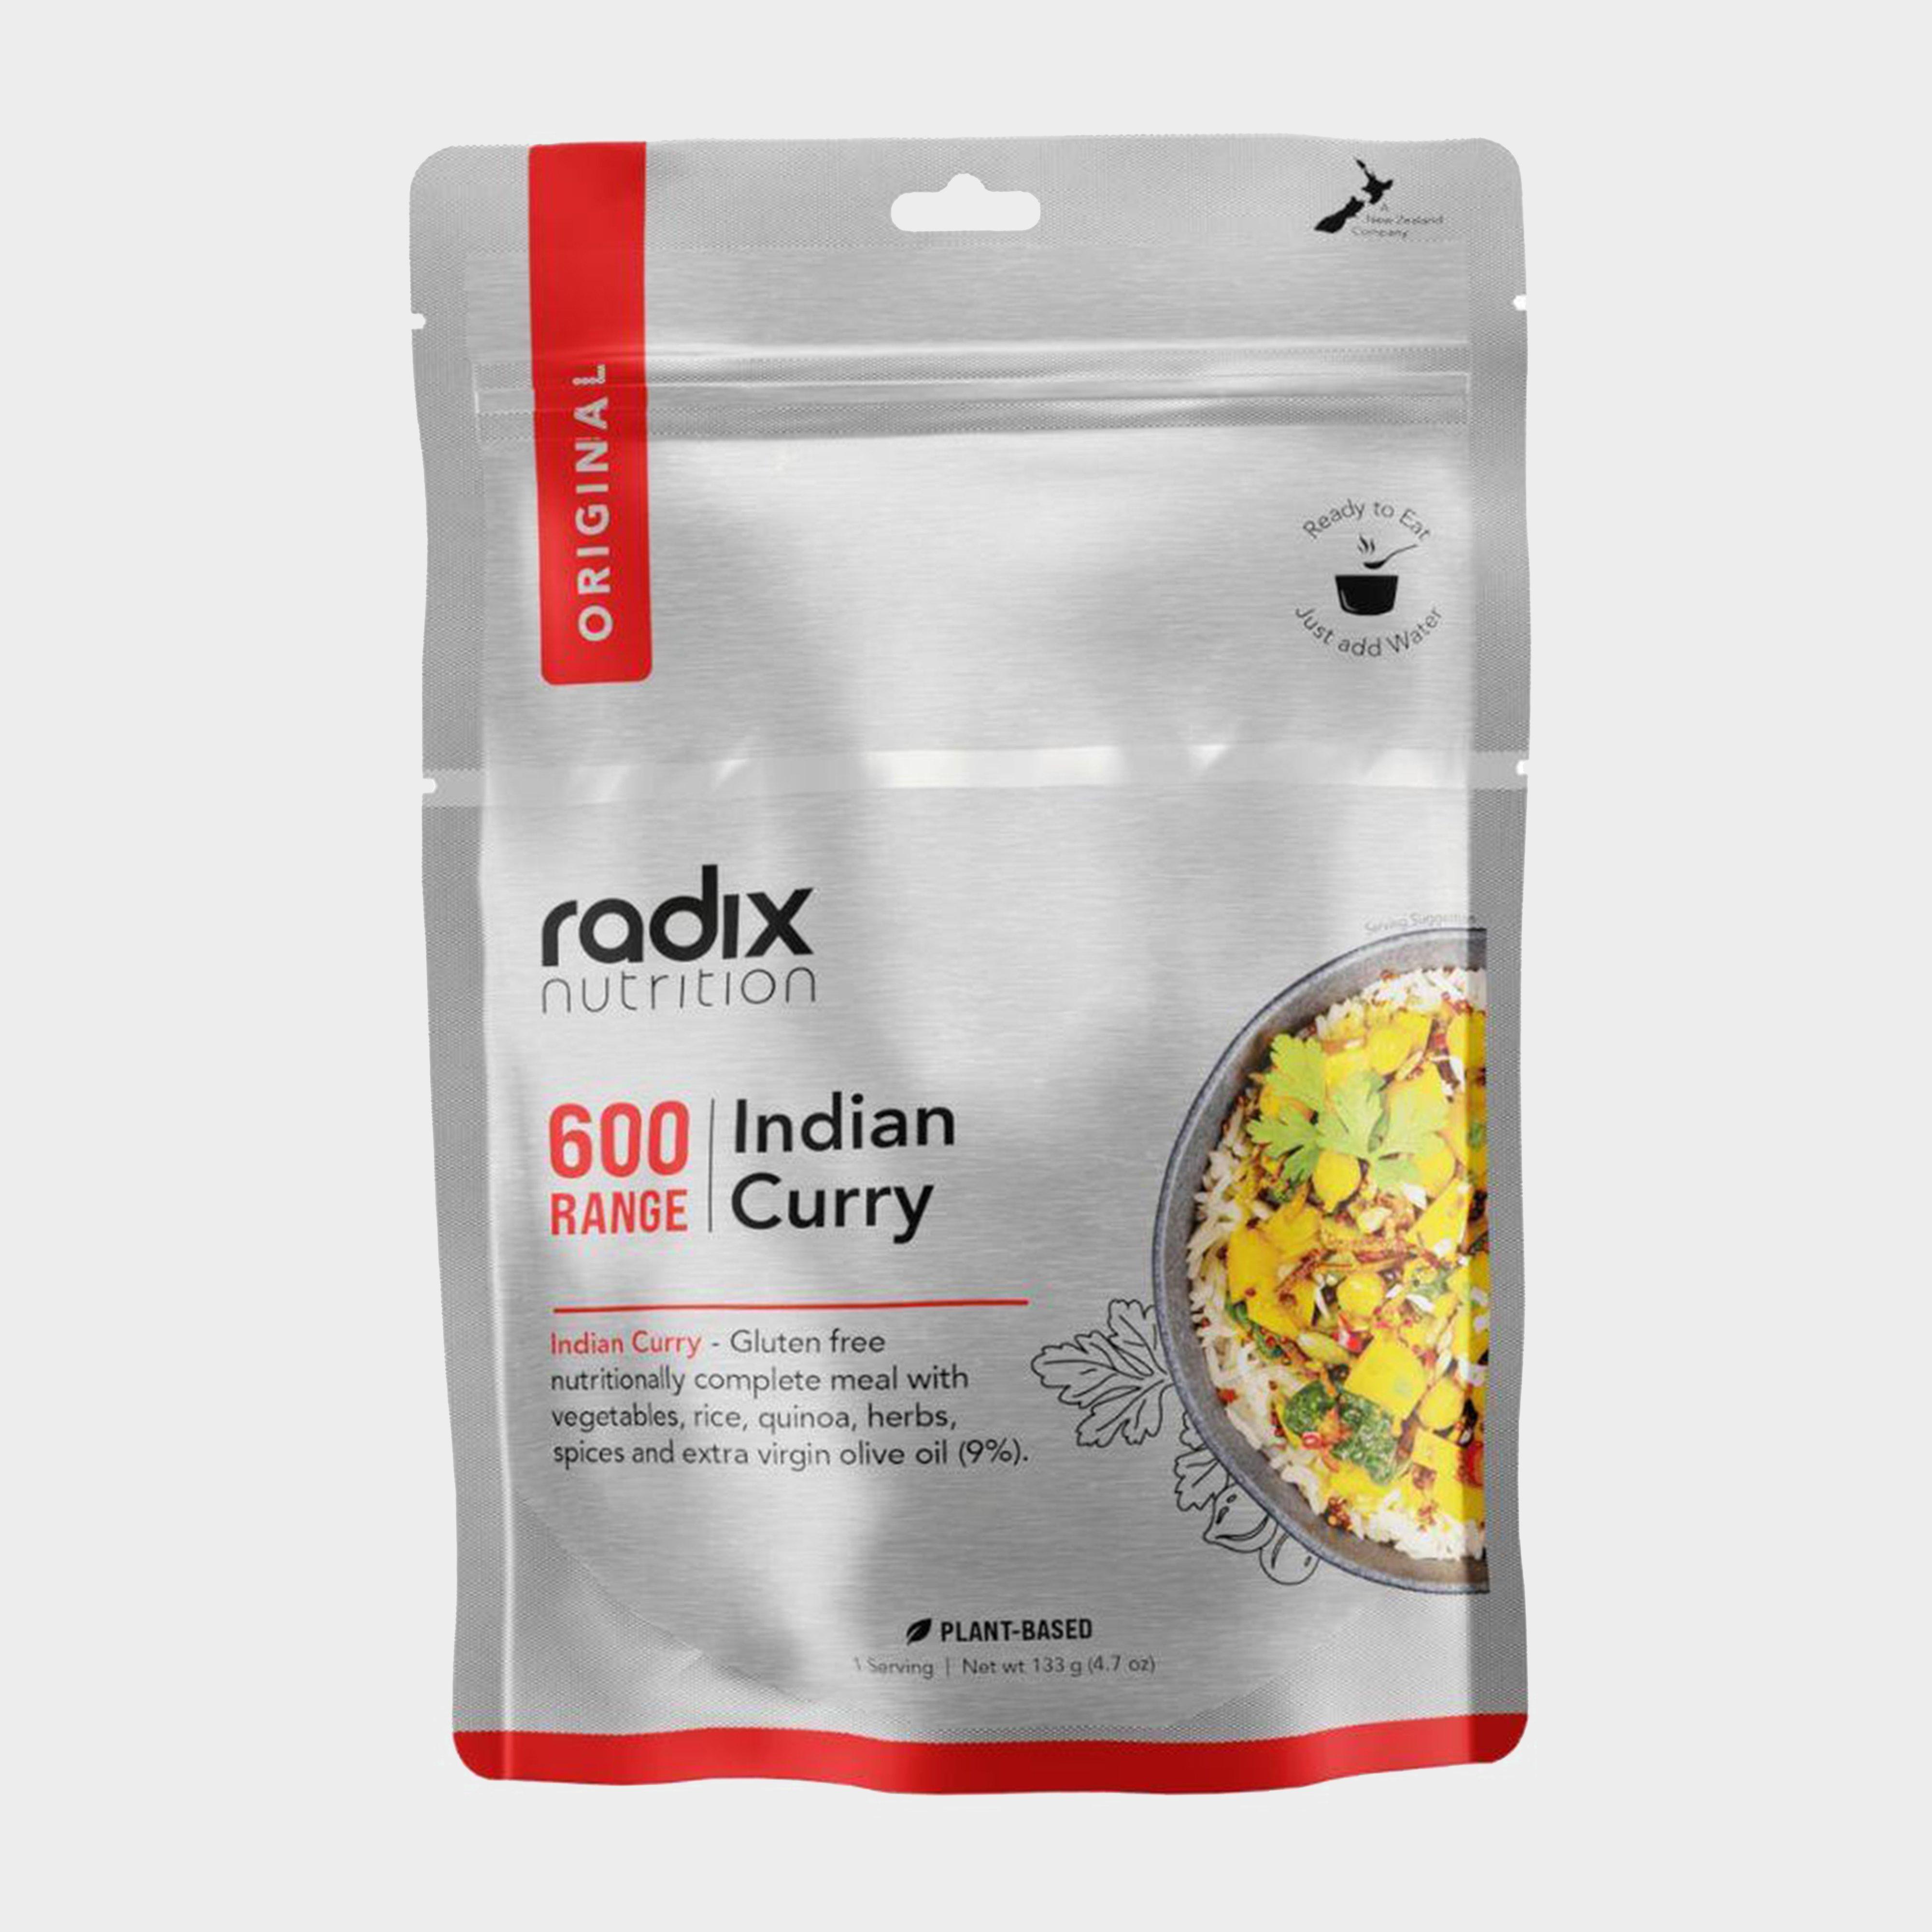 Image of Radix Indian Curry Meal 800 - 600, 600